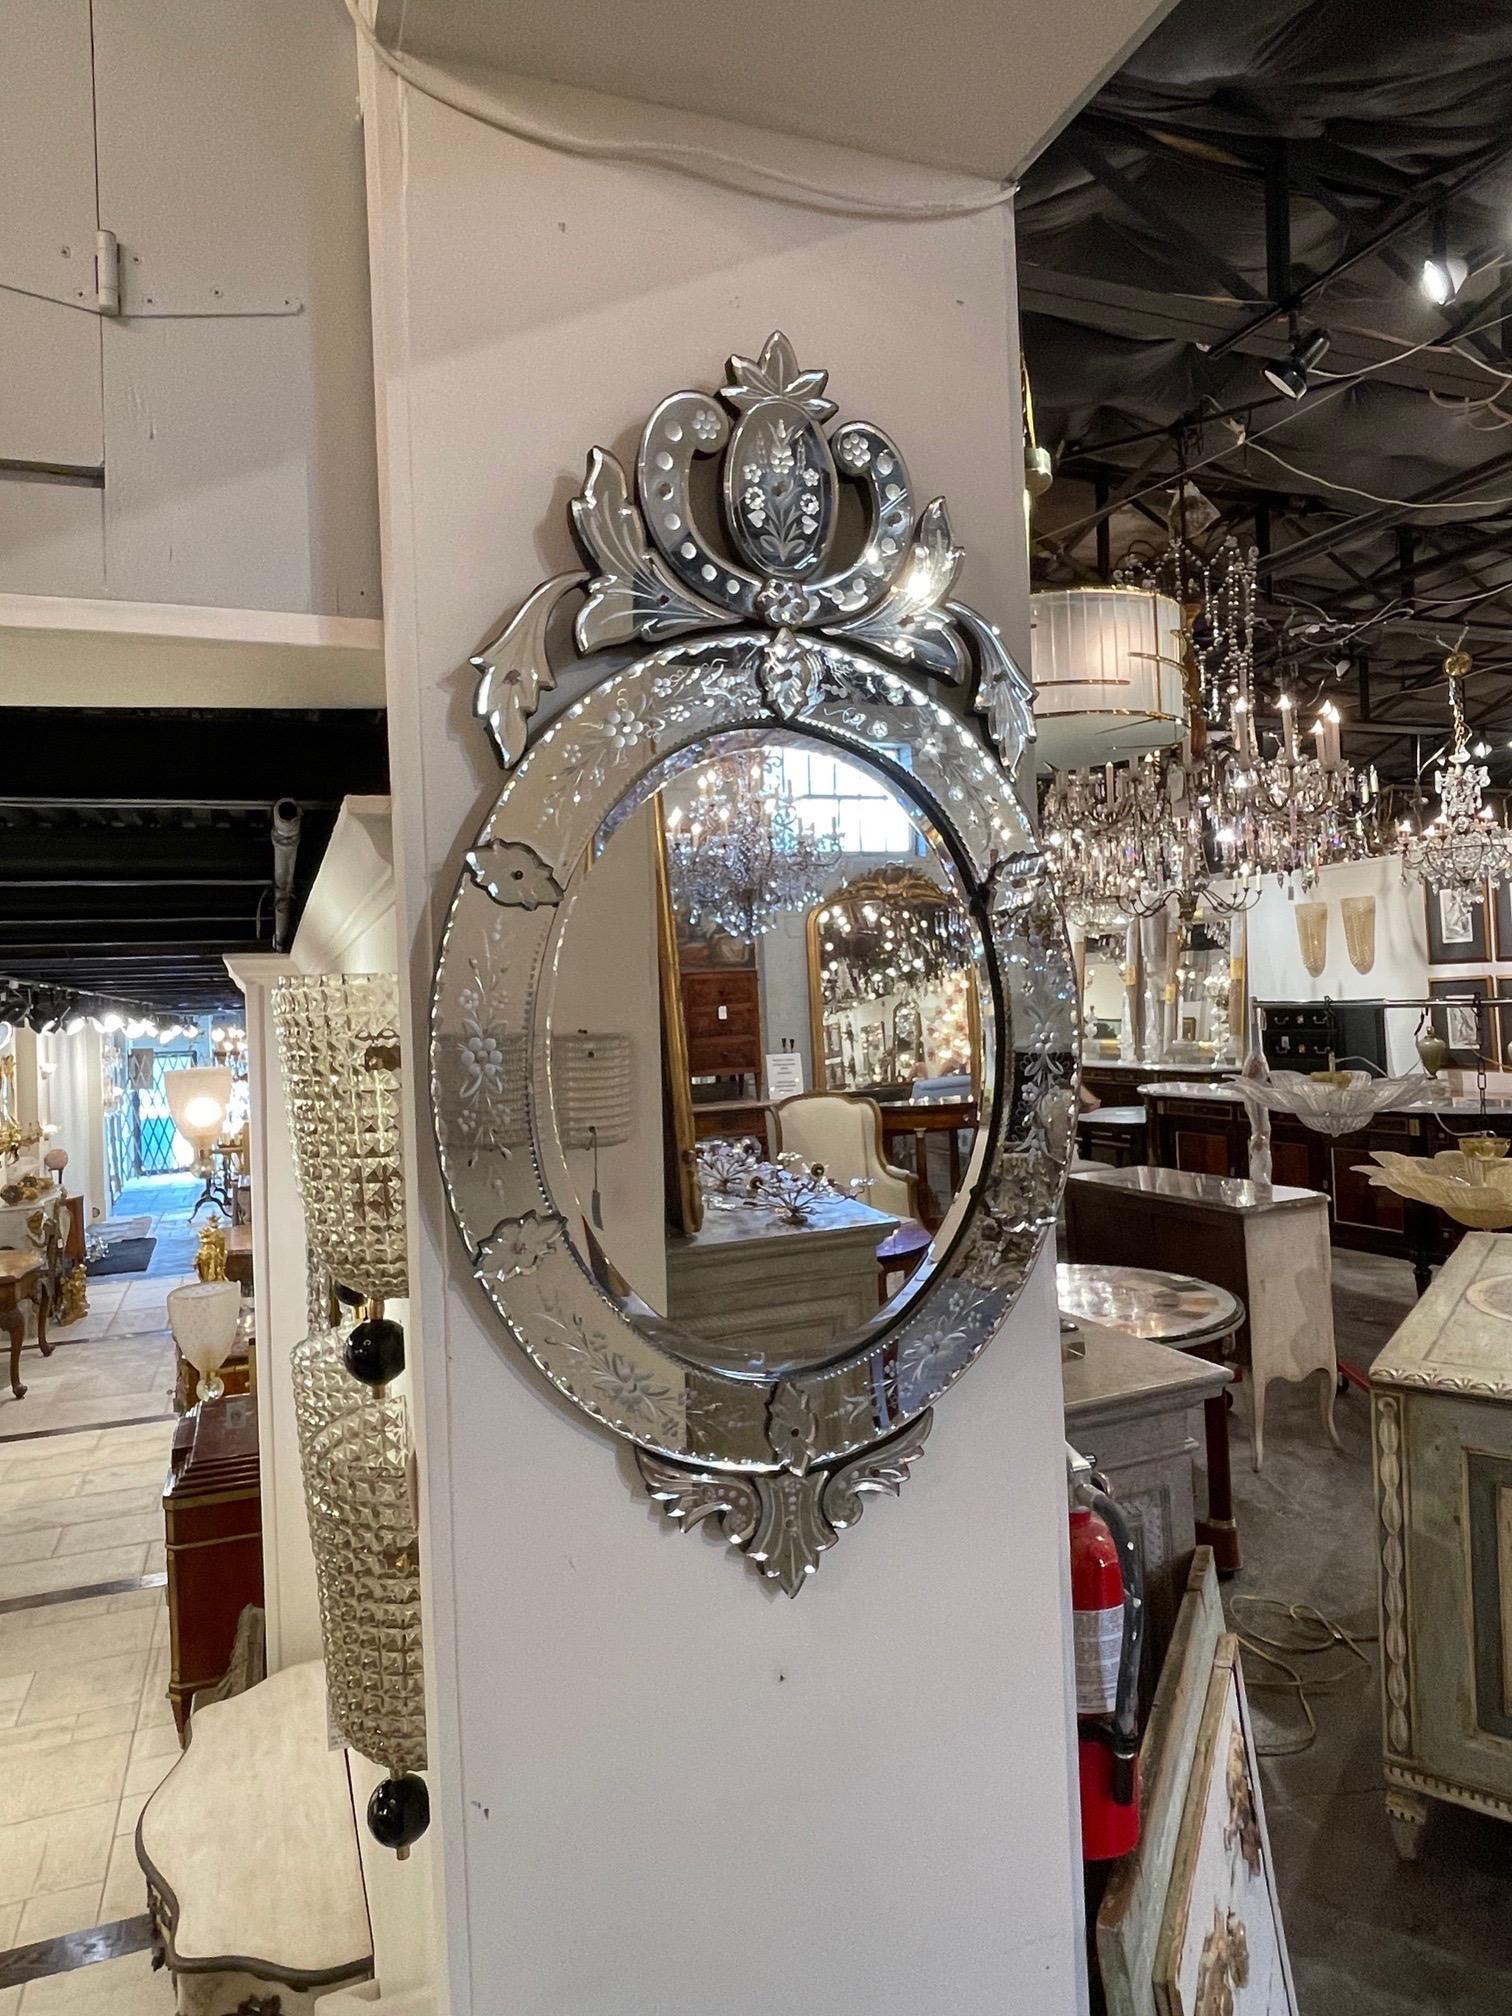 Exquisite oval shaped vintage Italian Venetian style etched glass mirror. Beautiful floral images etched in the glass and lovely crown at the top. Gorgeous!!